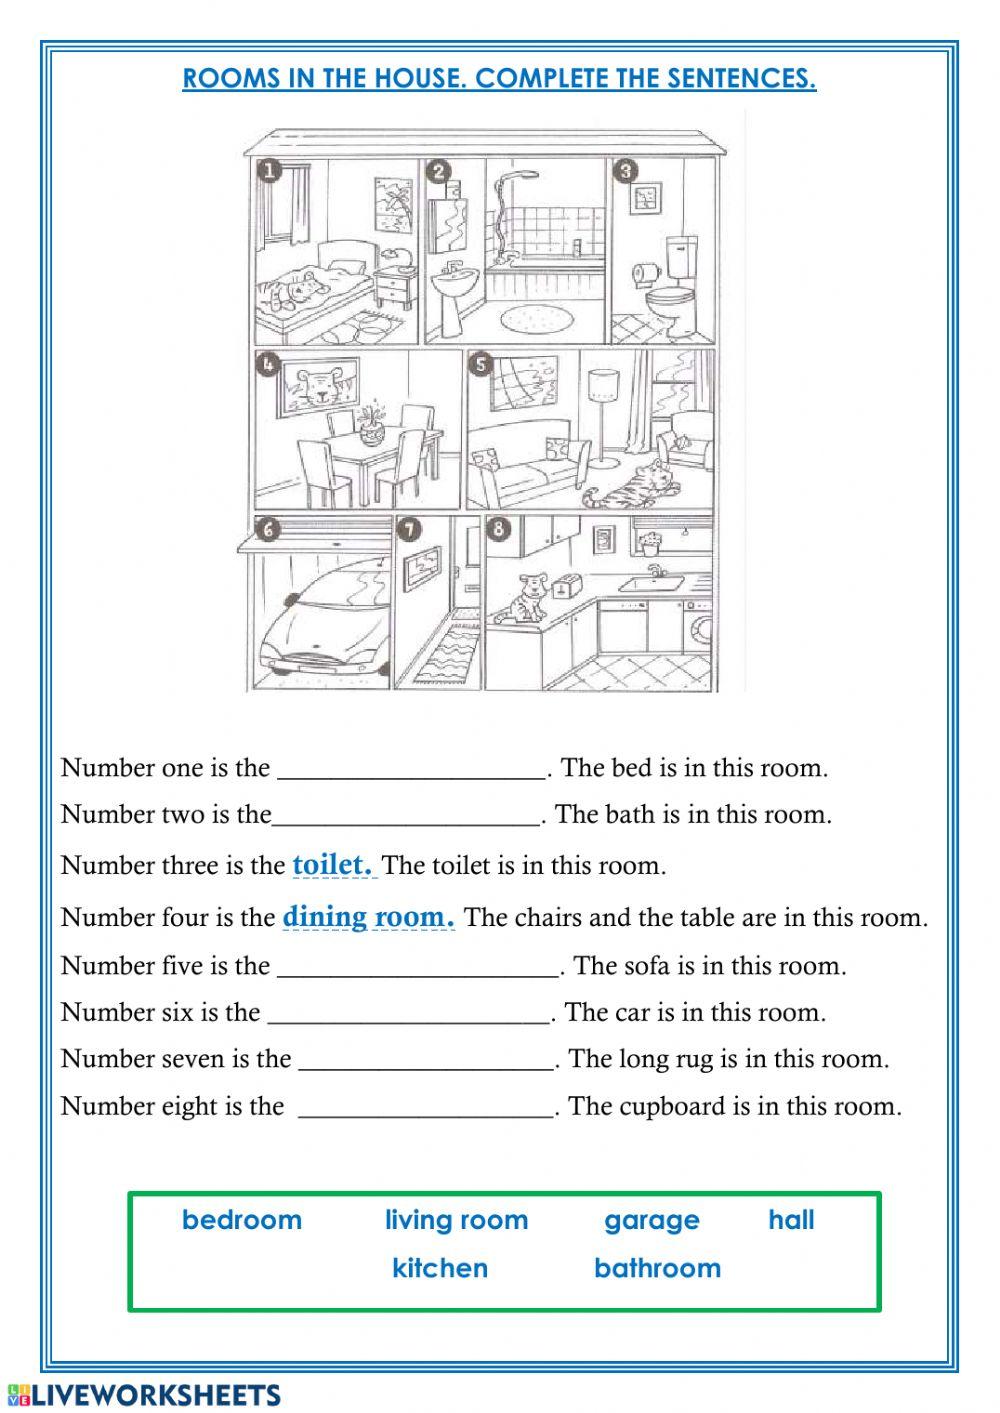 Rooms in the house interactive worksheet for Grade 2 | Live Worksheets